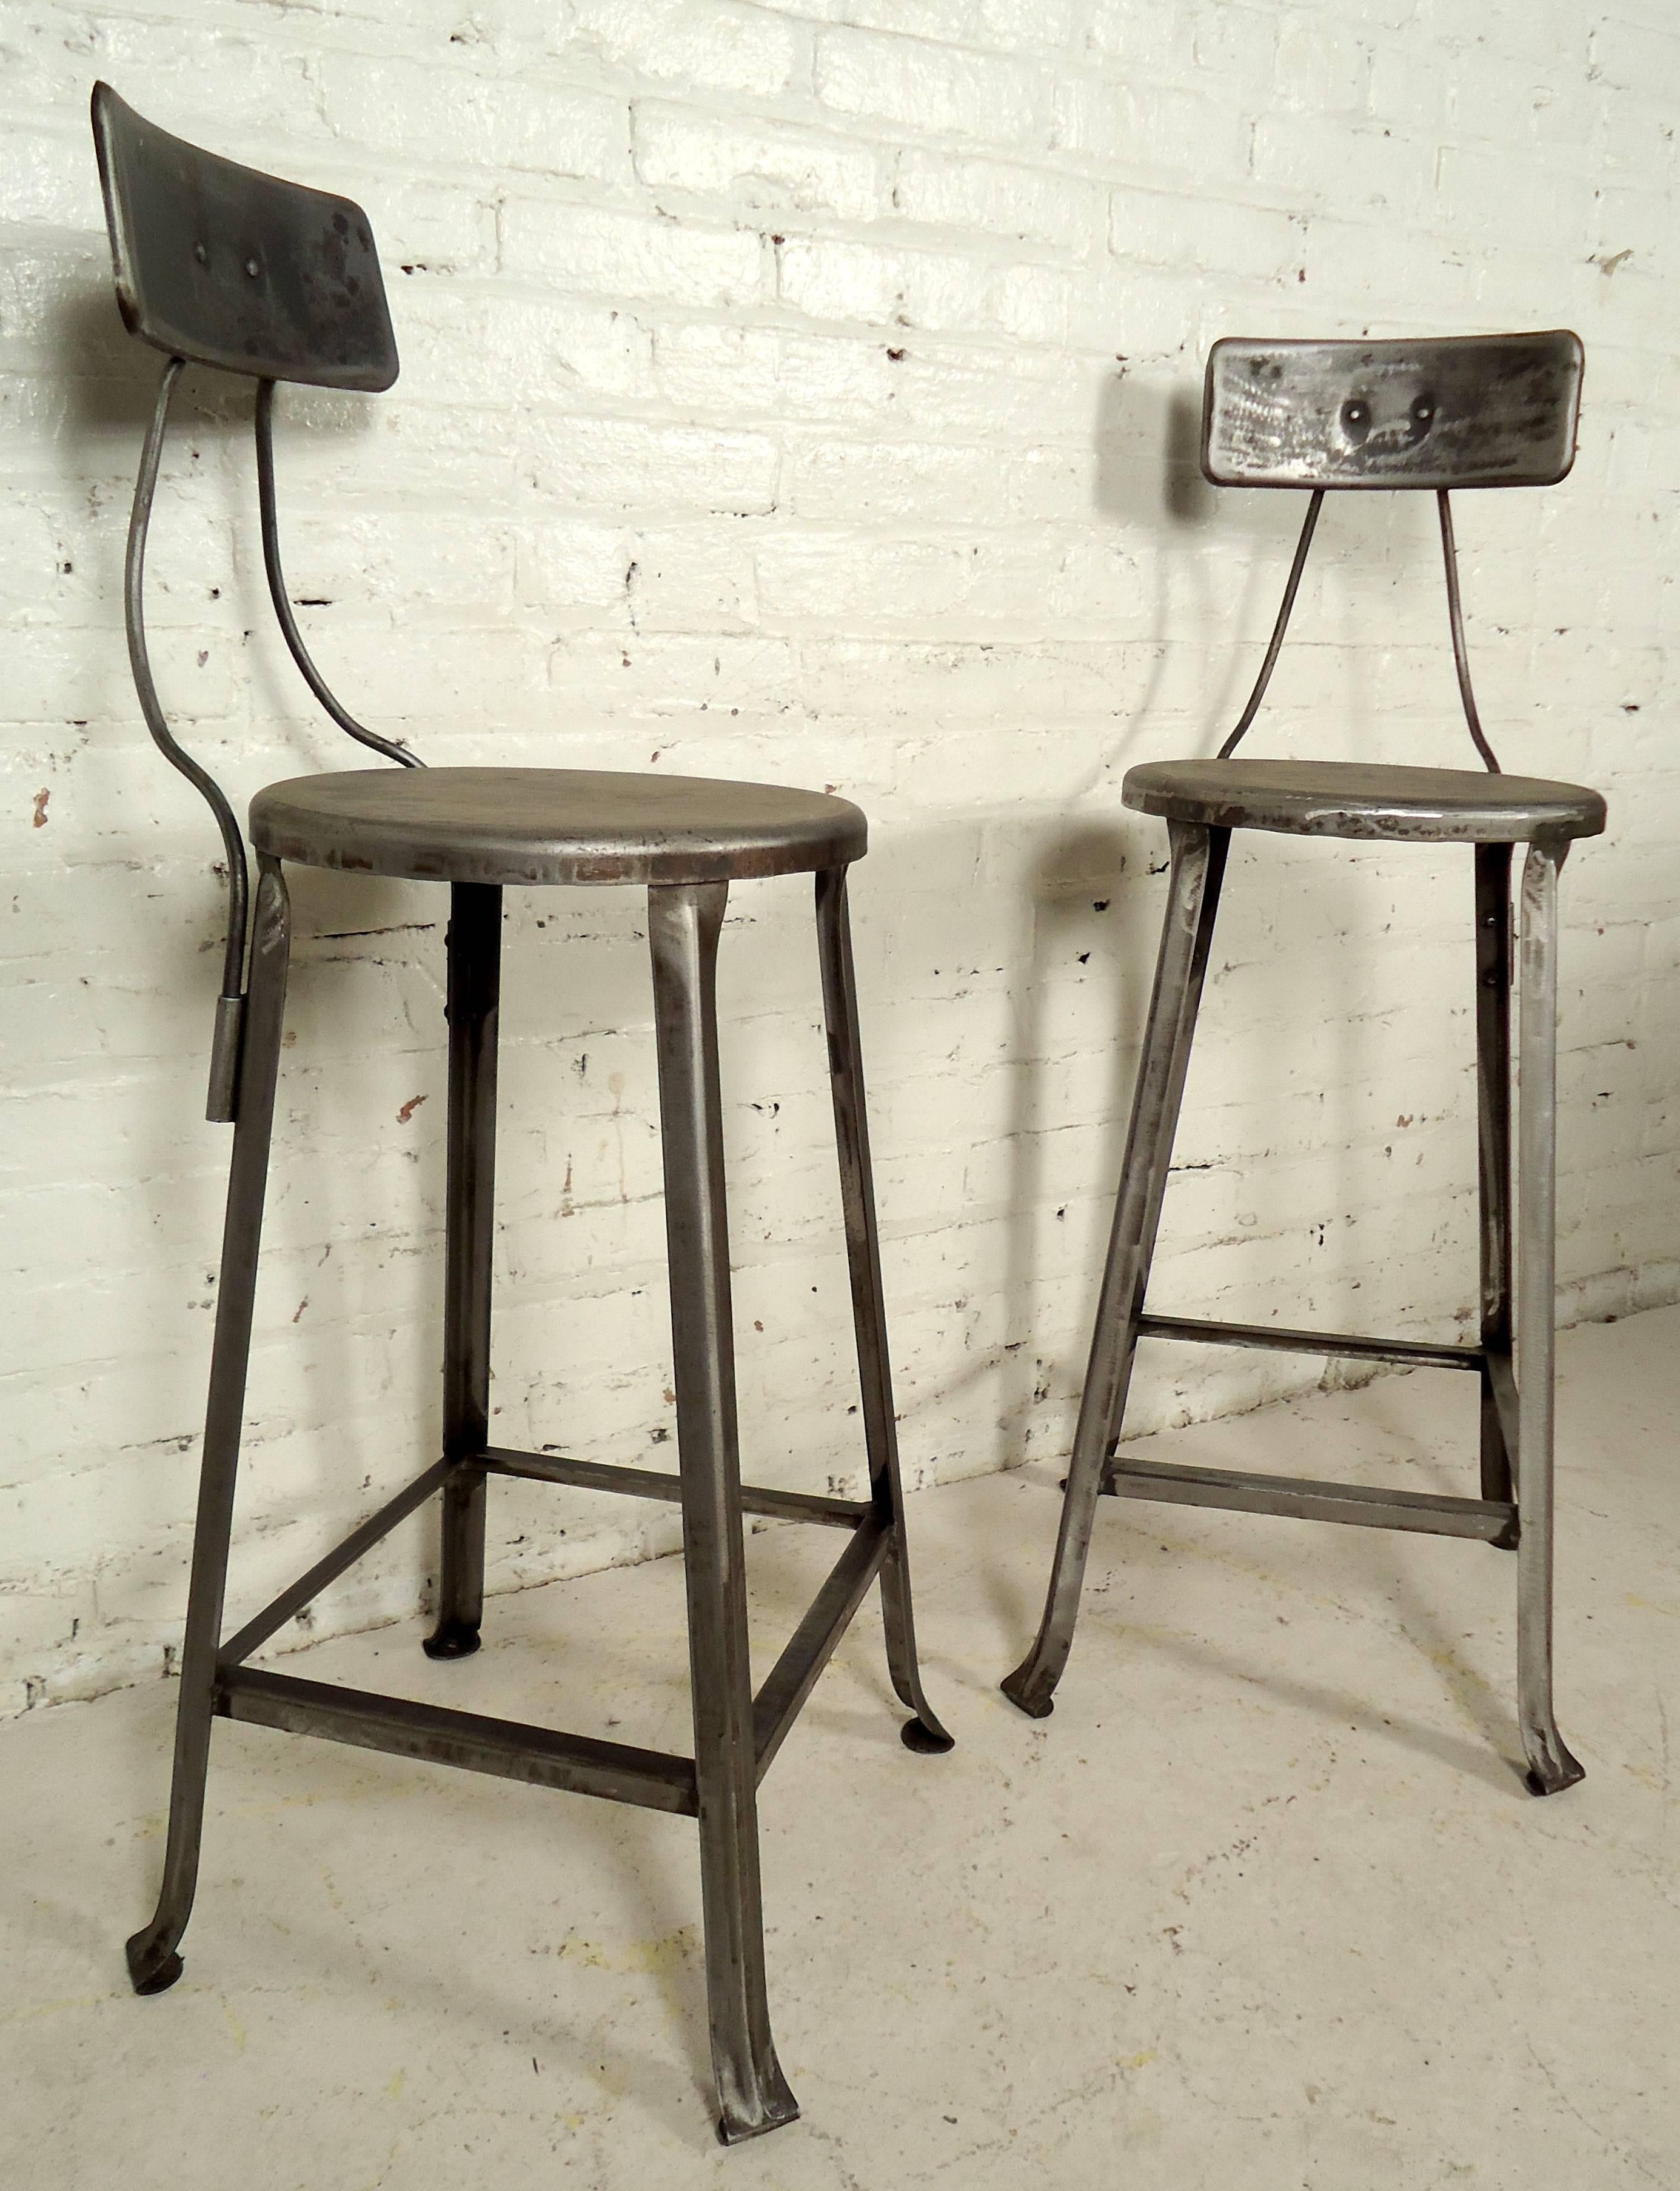 Mid-20th Century Pair of Toledo Style Industrial Factory Stools